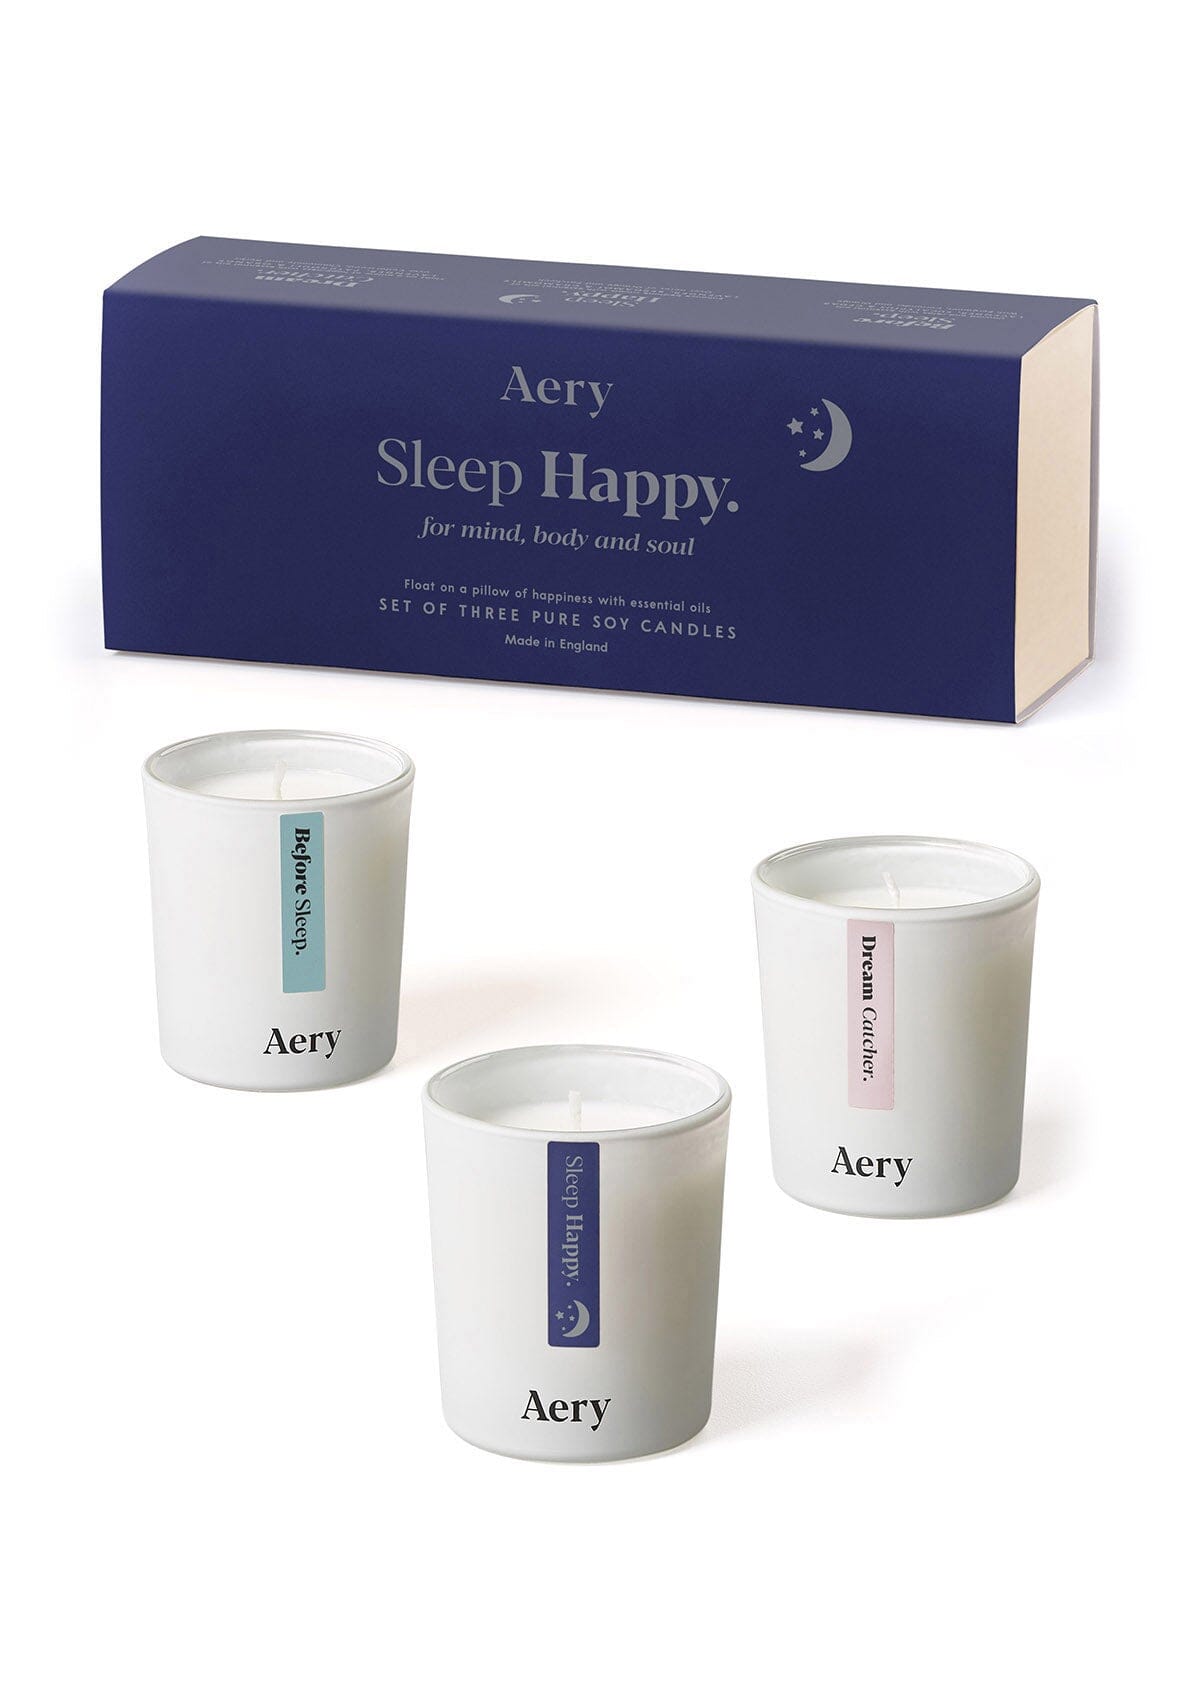 Blue Sleep Happy candle gift set of three by Aery displayed next to product packaging on white background 